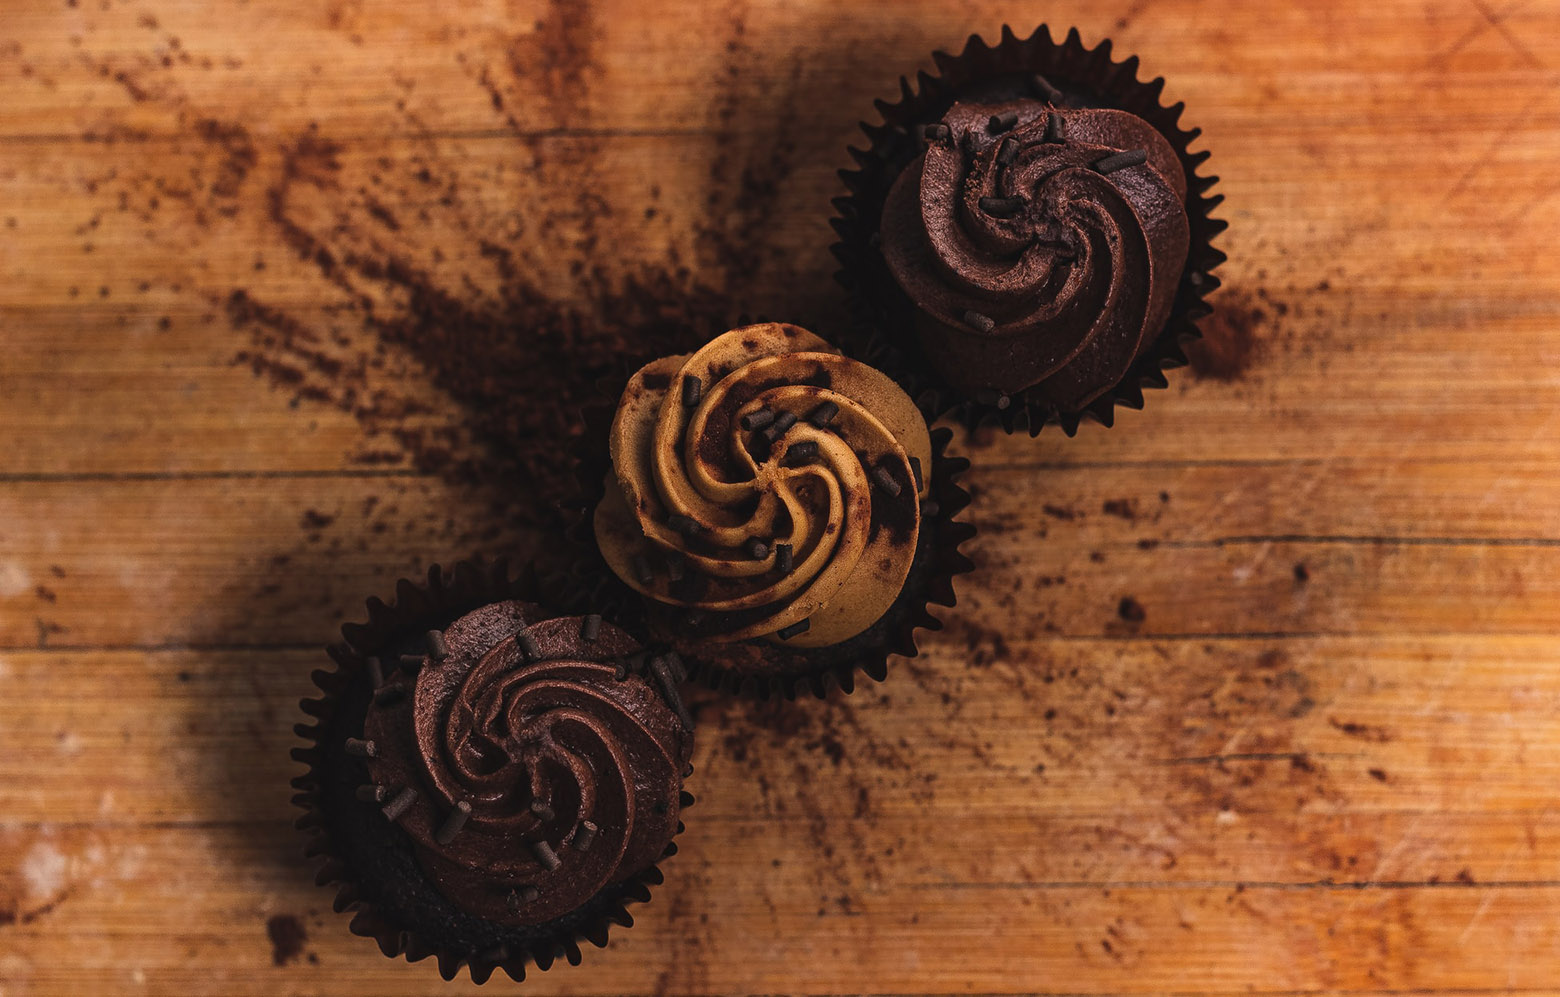 Three chocolate cupcakes lined up diagonally on the brown wooden surface. The middle cupcake is light brown, other two are dark brown.